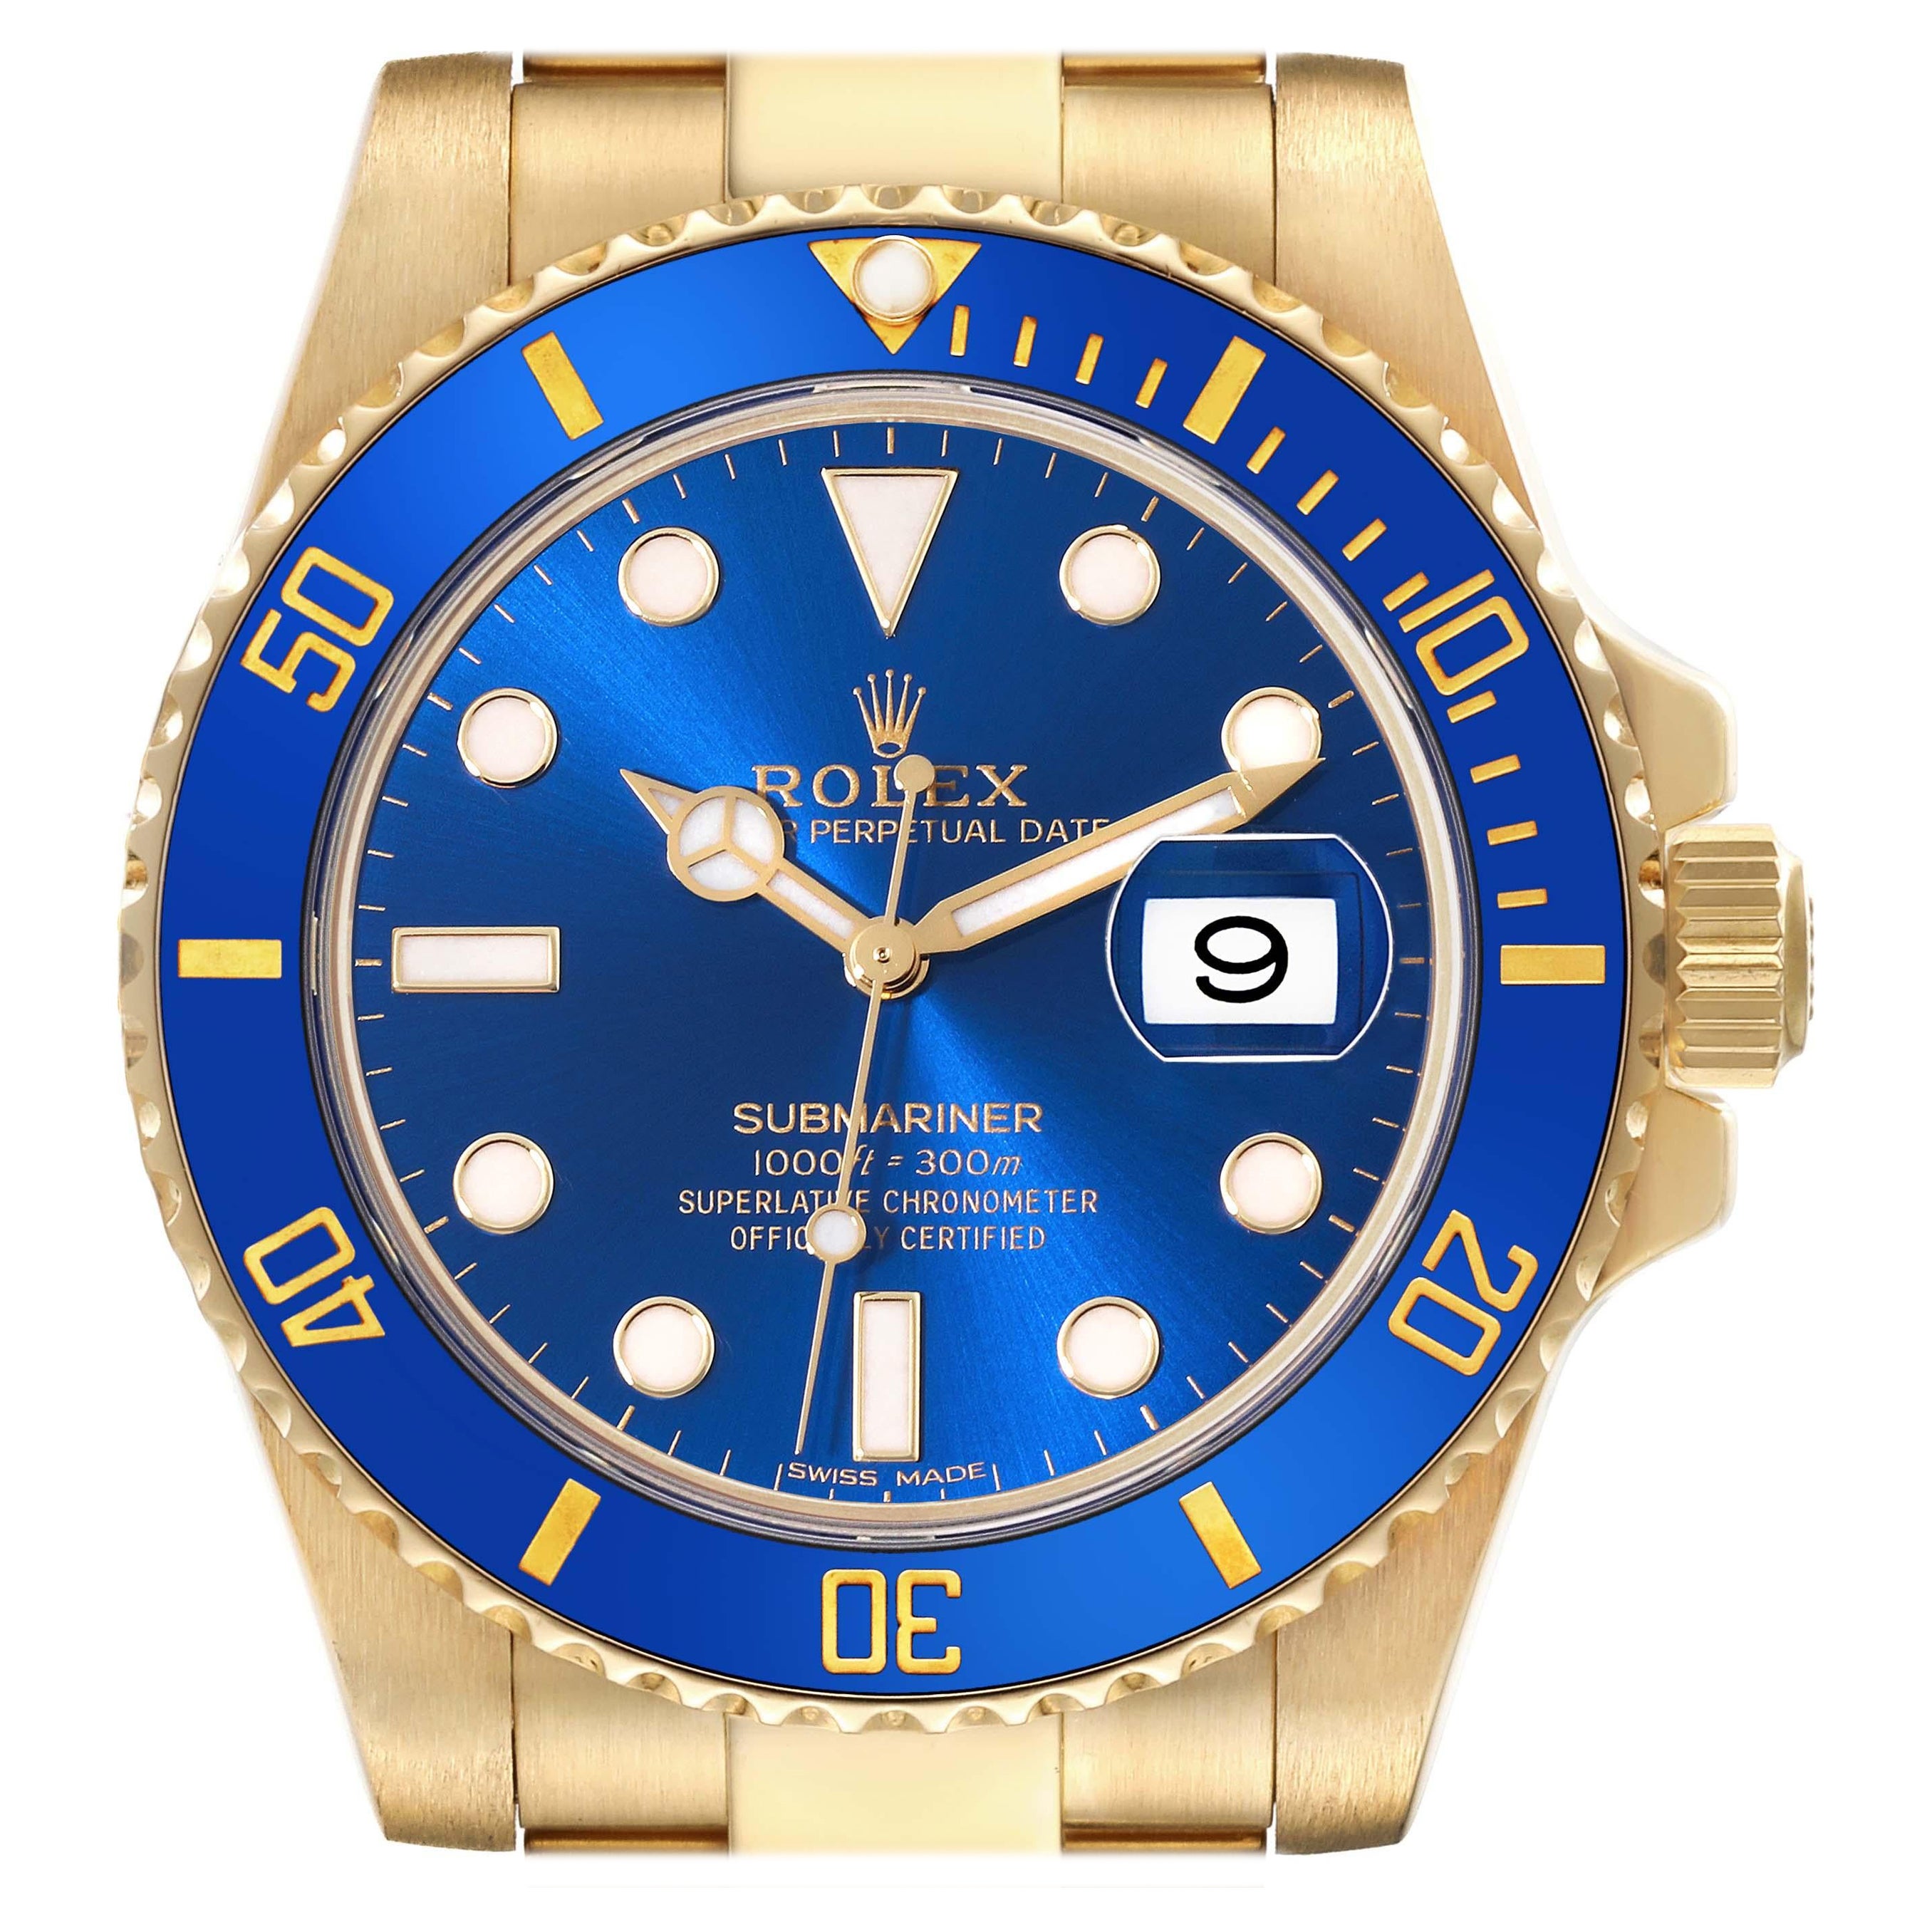 Rolex Submariner Yellow Gold Blue Dial Ceramic Bezel Mens Watch 116618 Box Card For Sale